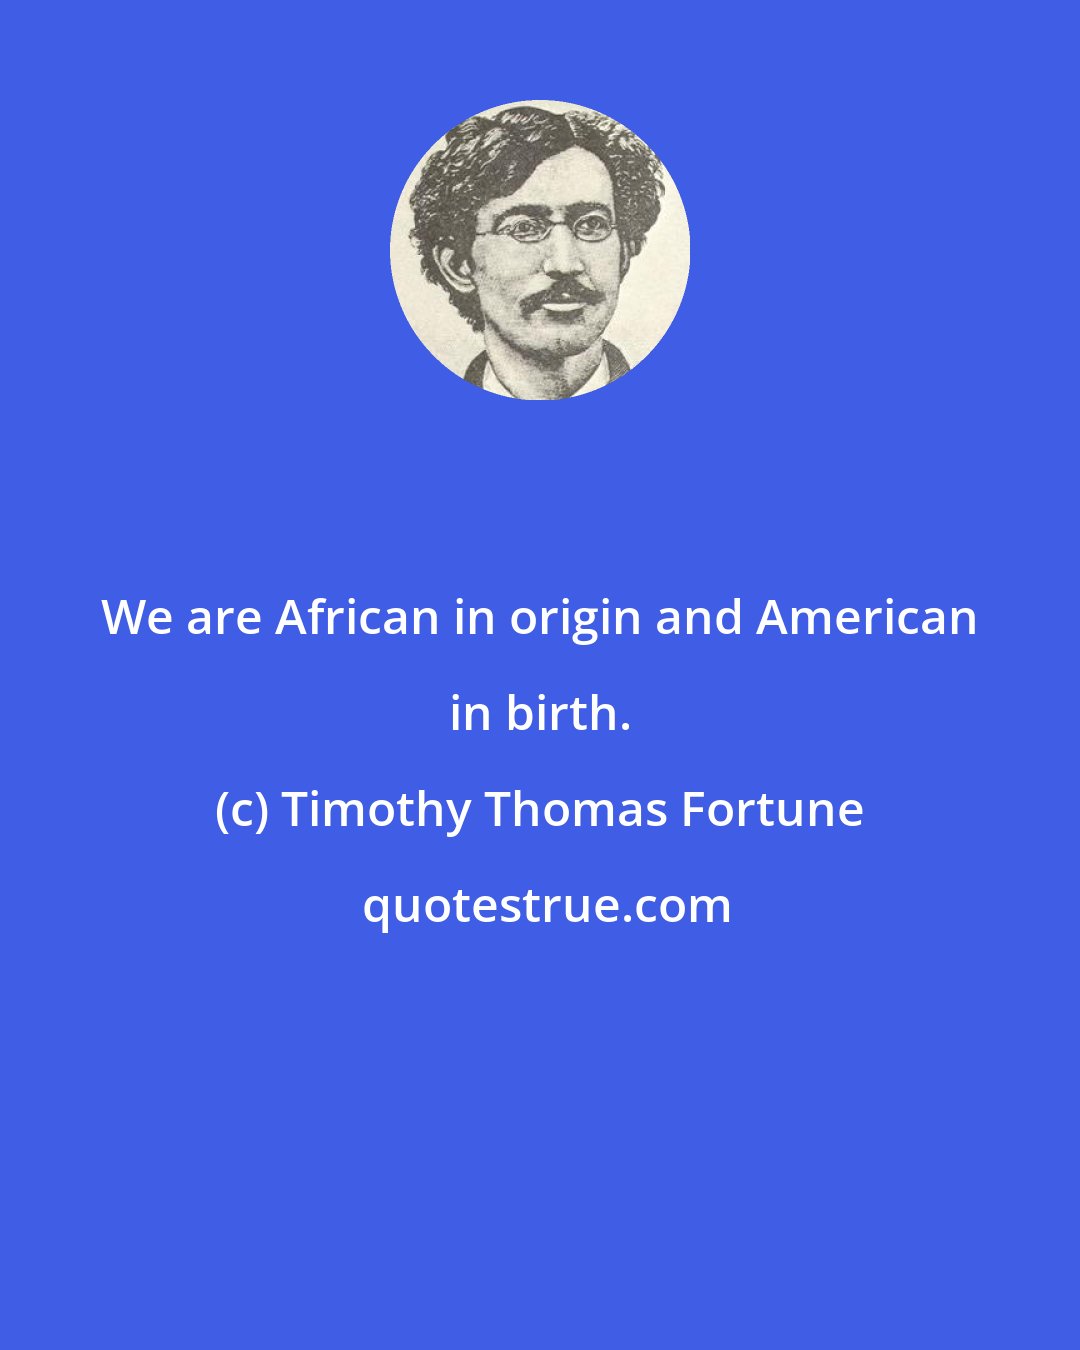 Timothy Thomas Fortune: We are African in origin and American in birth.